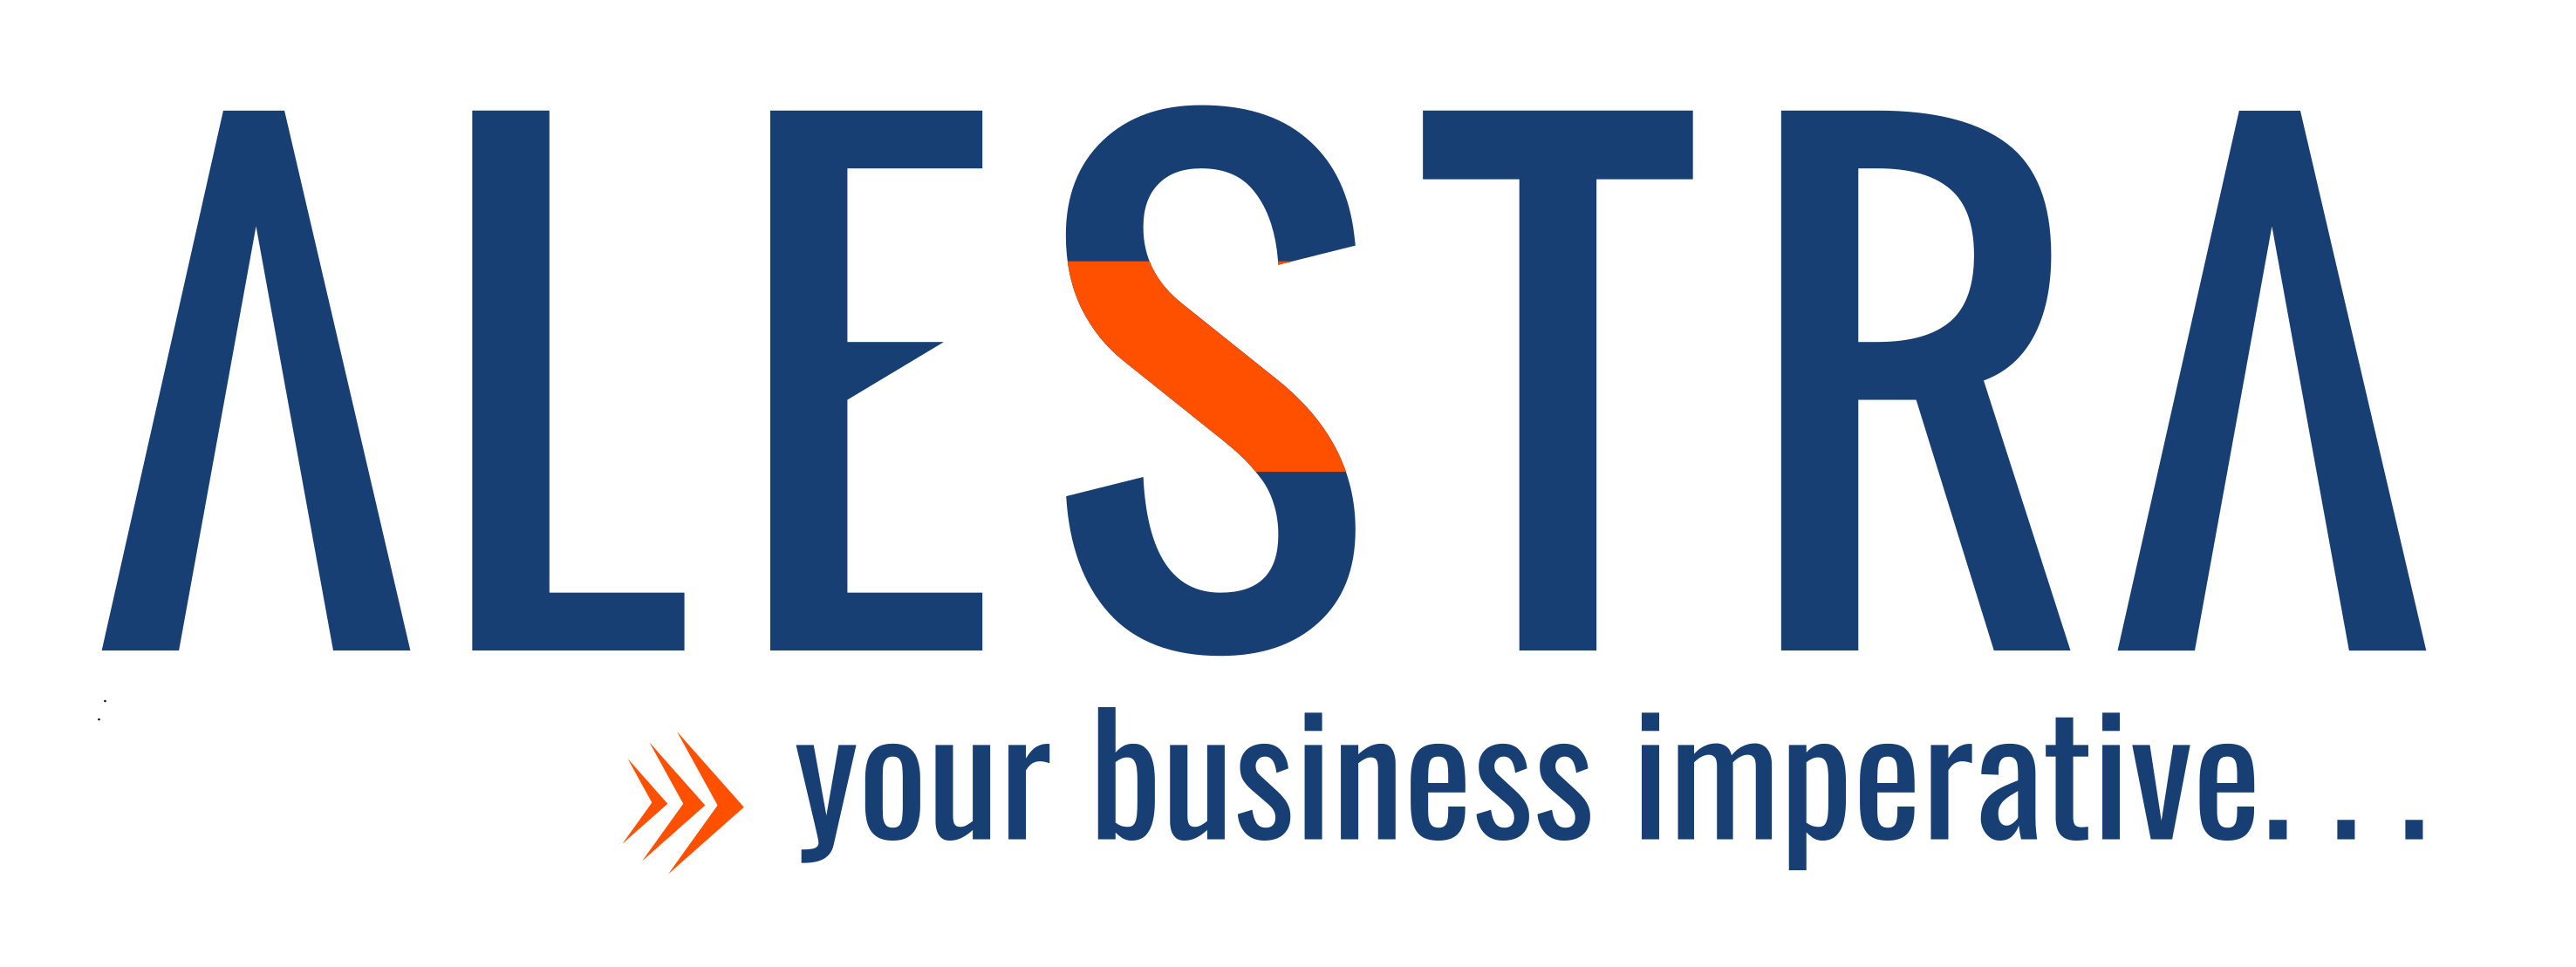 ALESTRA BUSINESS SOLUTIONS